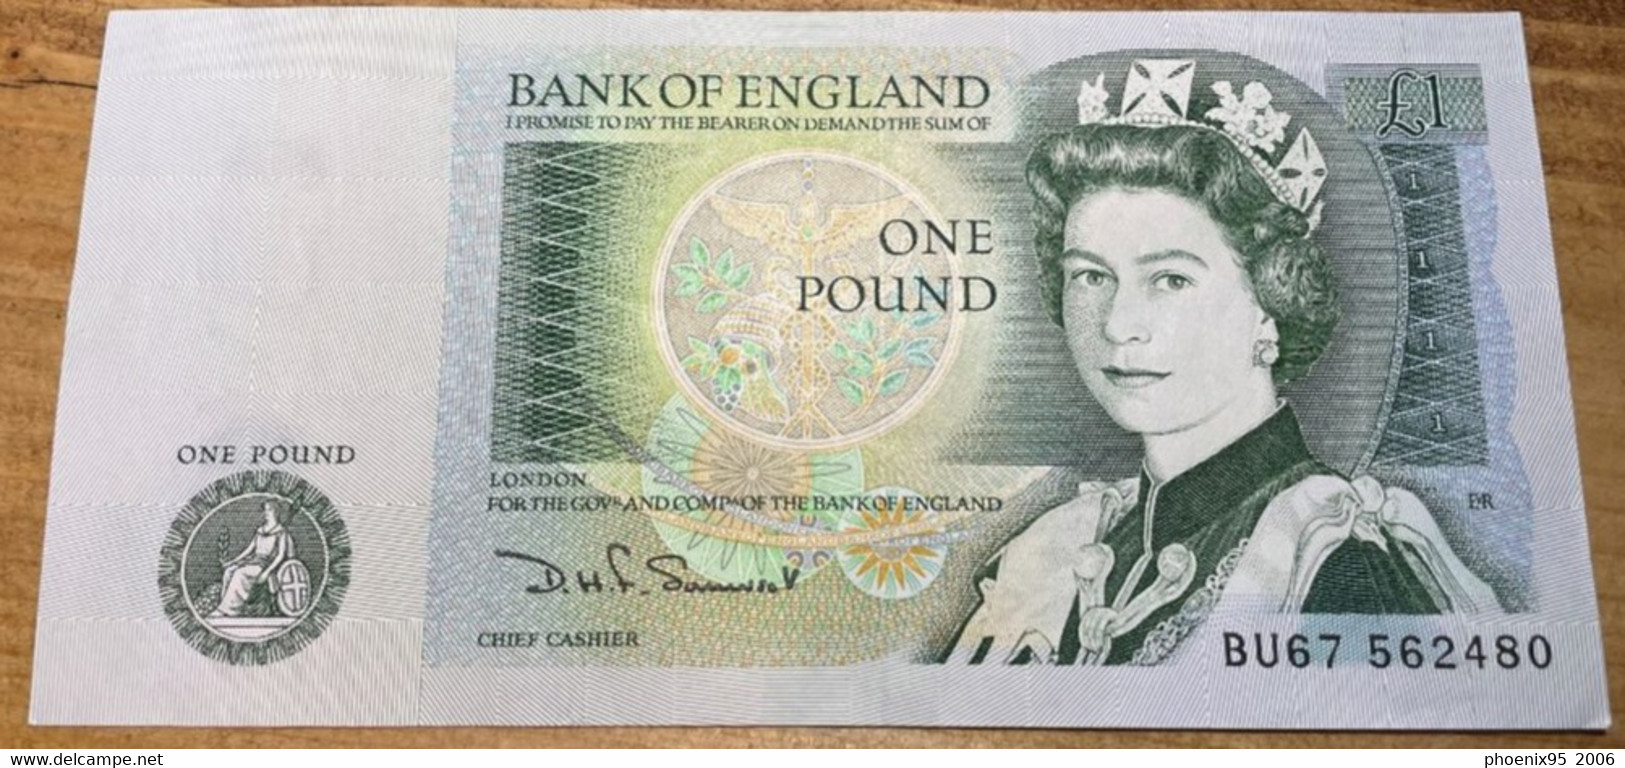 Bank Of England £1 Note (BU67 Series, DHF Somerset) - Excellent Condition - 1 Pond